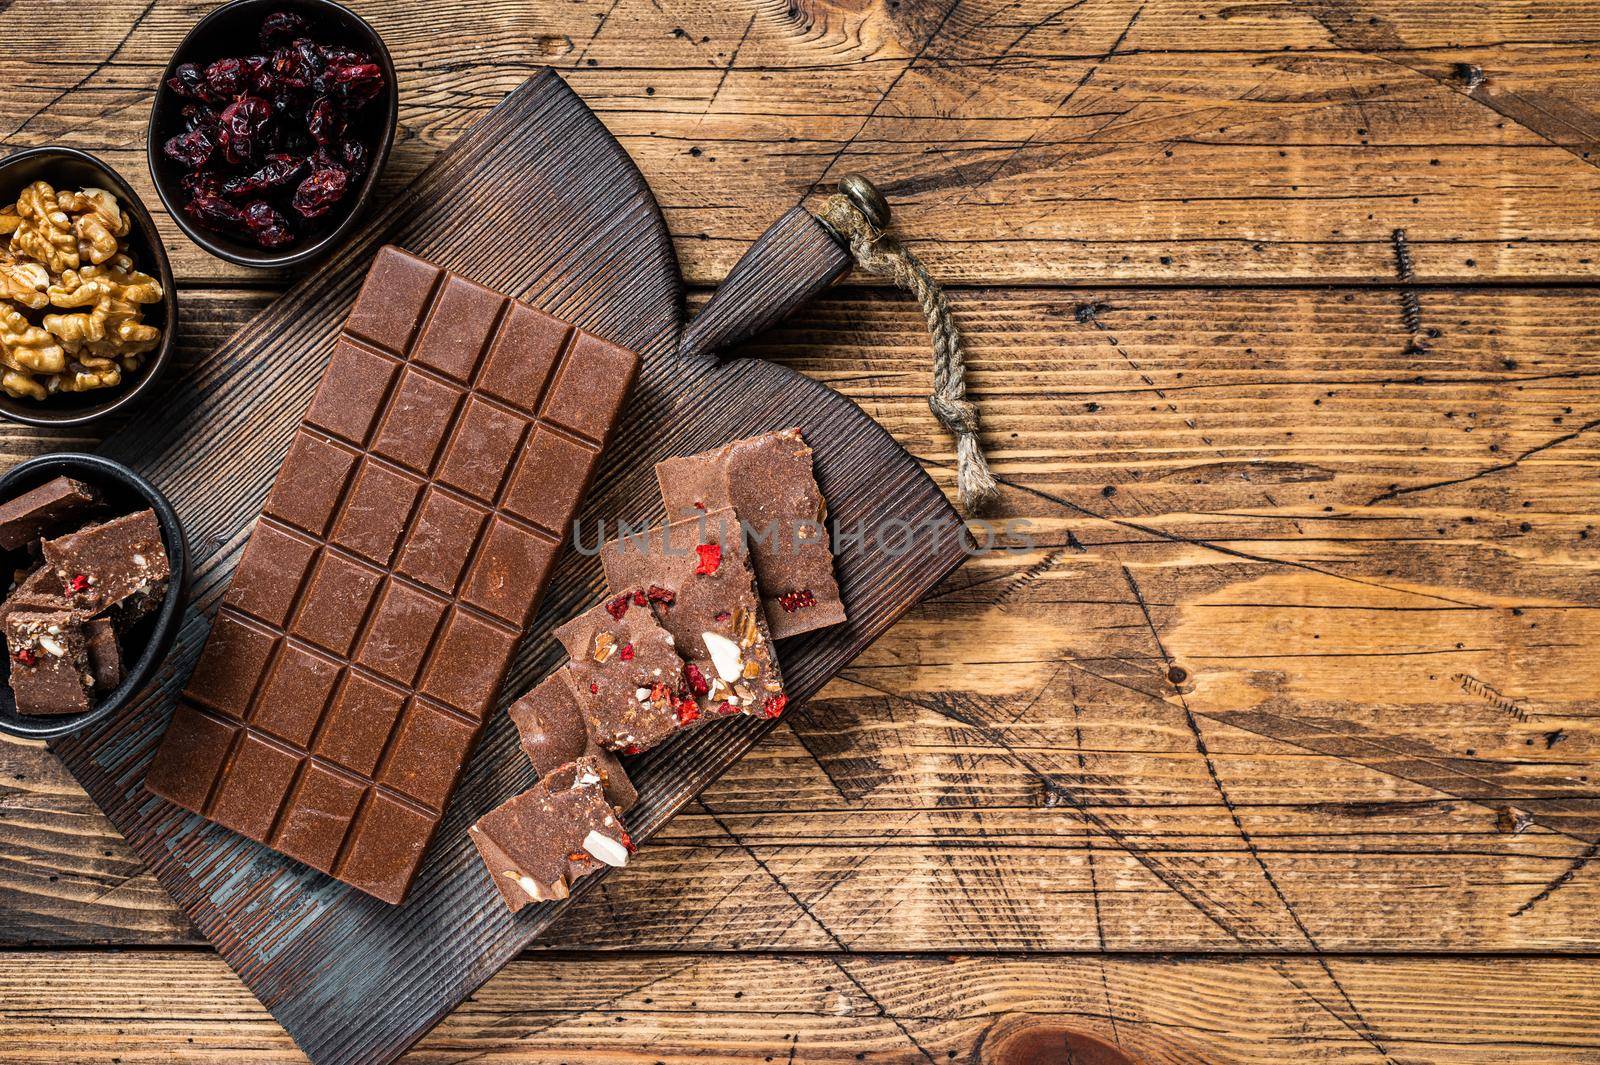 Dark chocolate bar with hazelnuts, peanuts, cranberries and freeze dried raspberries on a wooden board. wooden background. Top view. Copy space by Composter